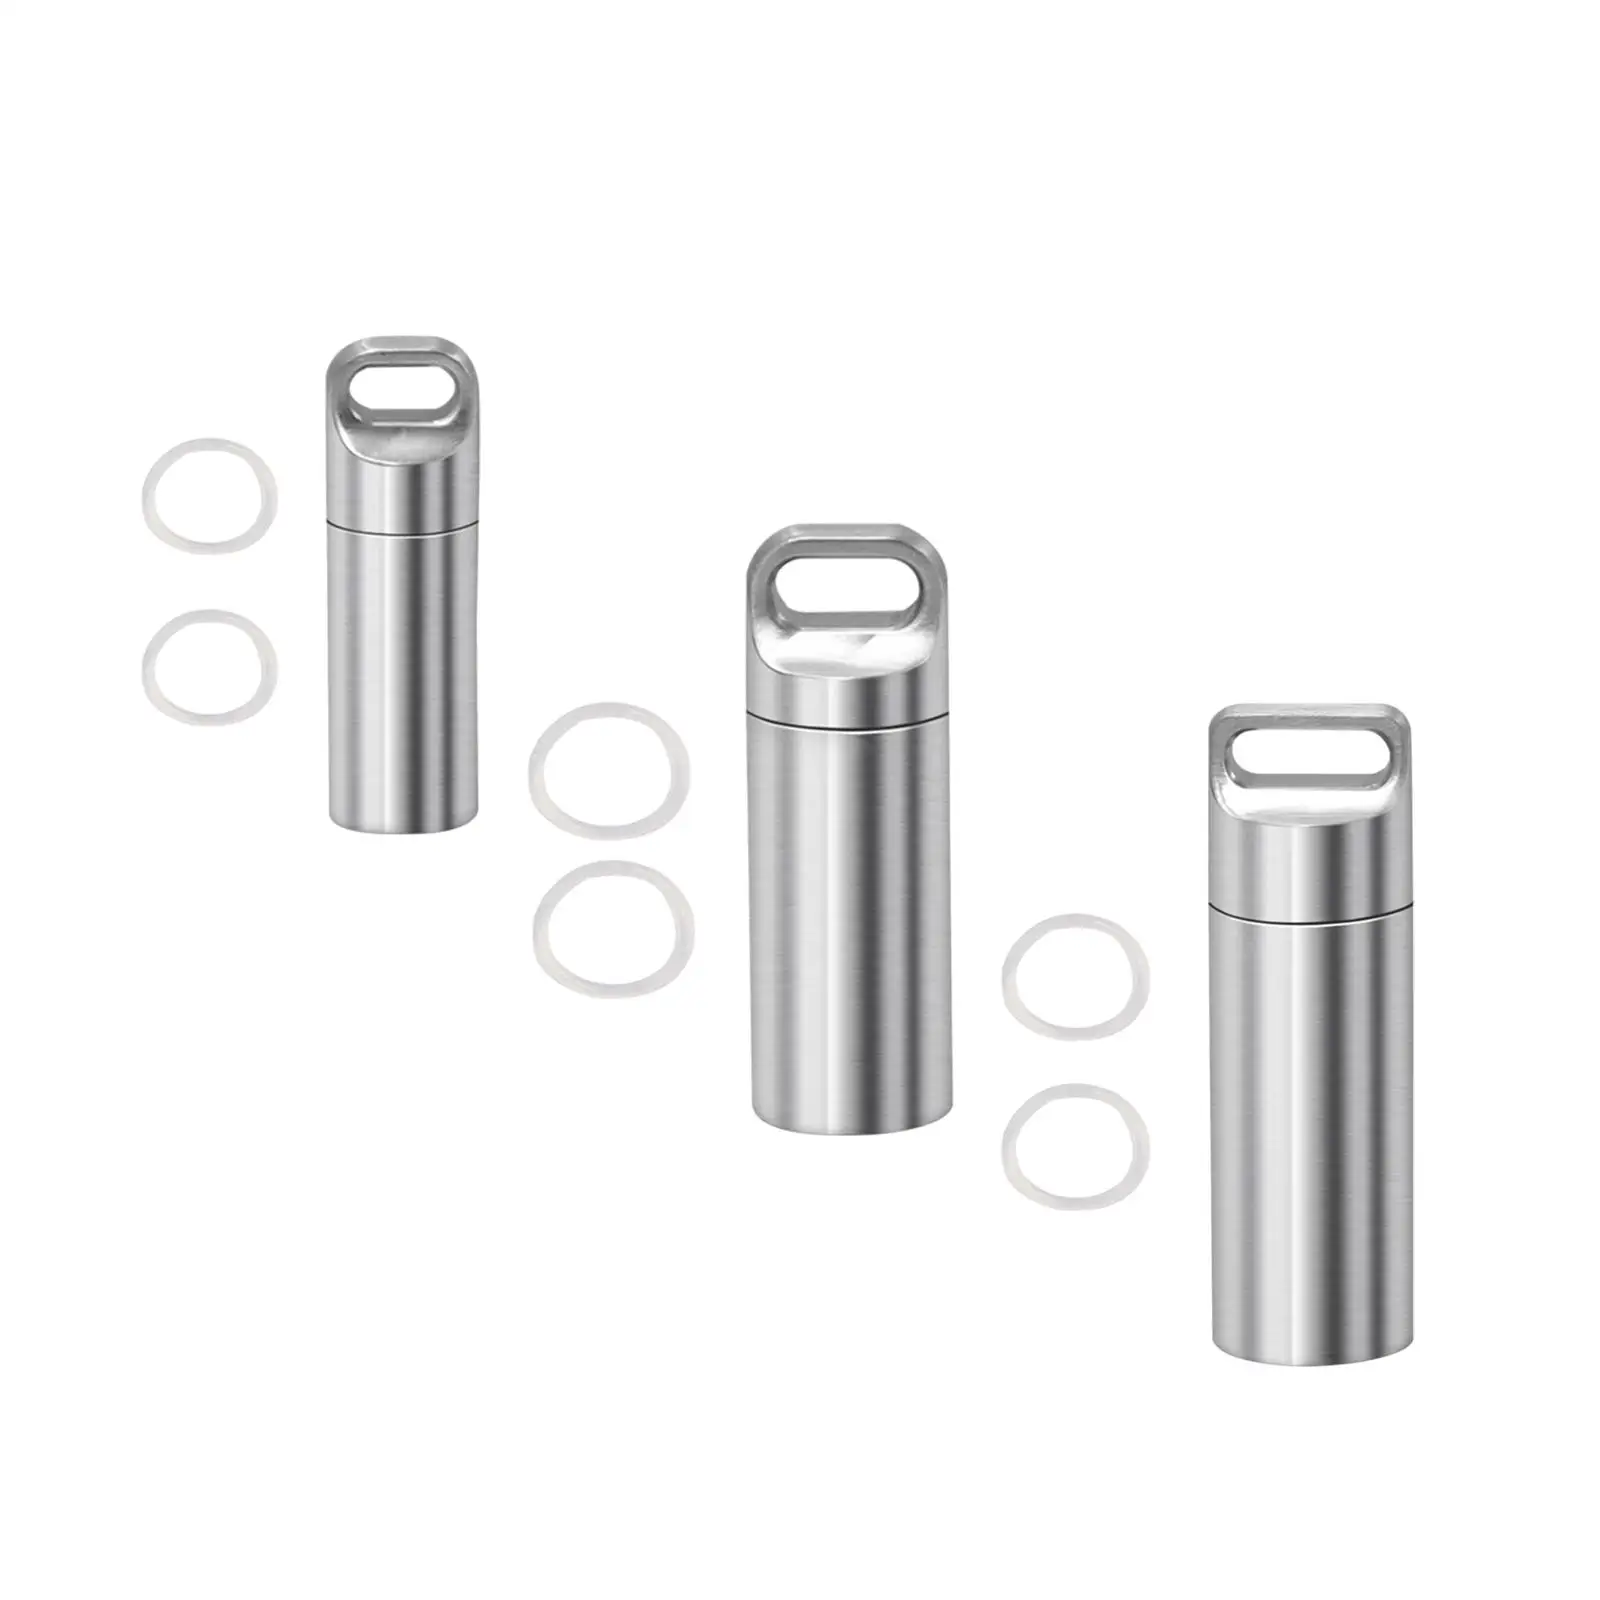 Pill Holders Stainless Steel Mini Single Chamber Small Pill Box Durable Pill Container Organizer for Travel Camping Outdoor